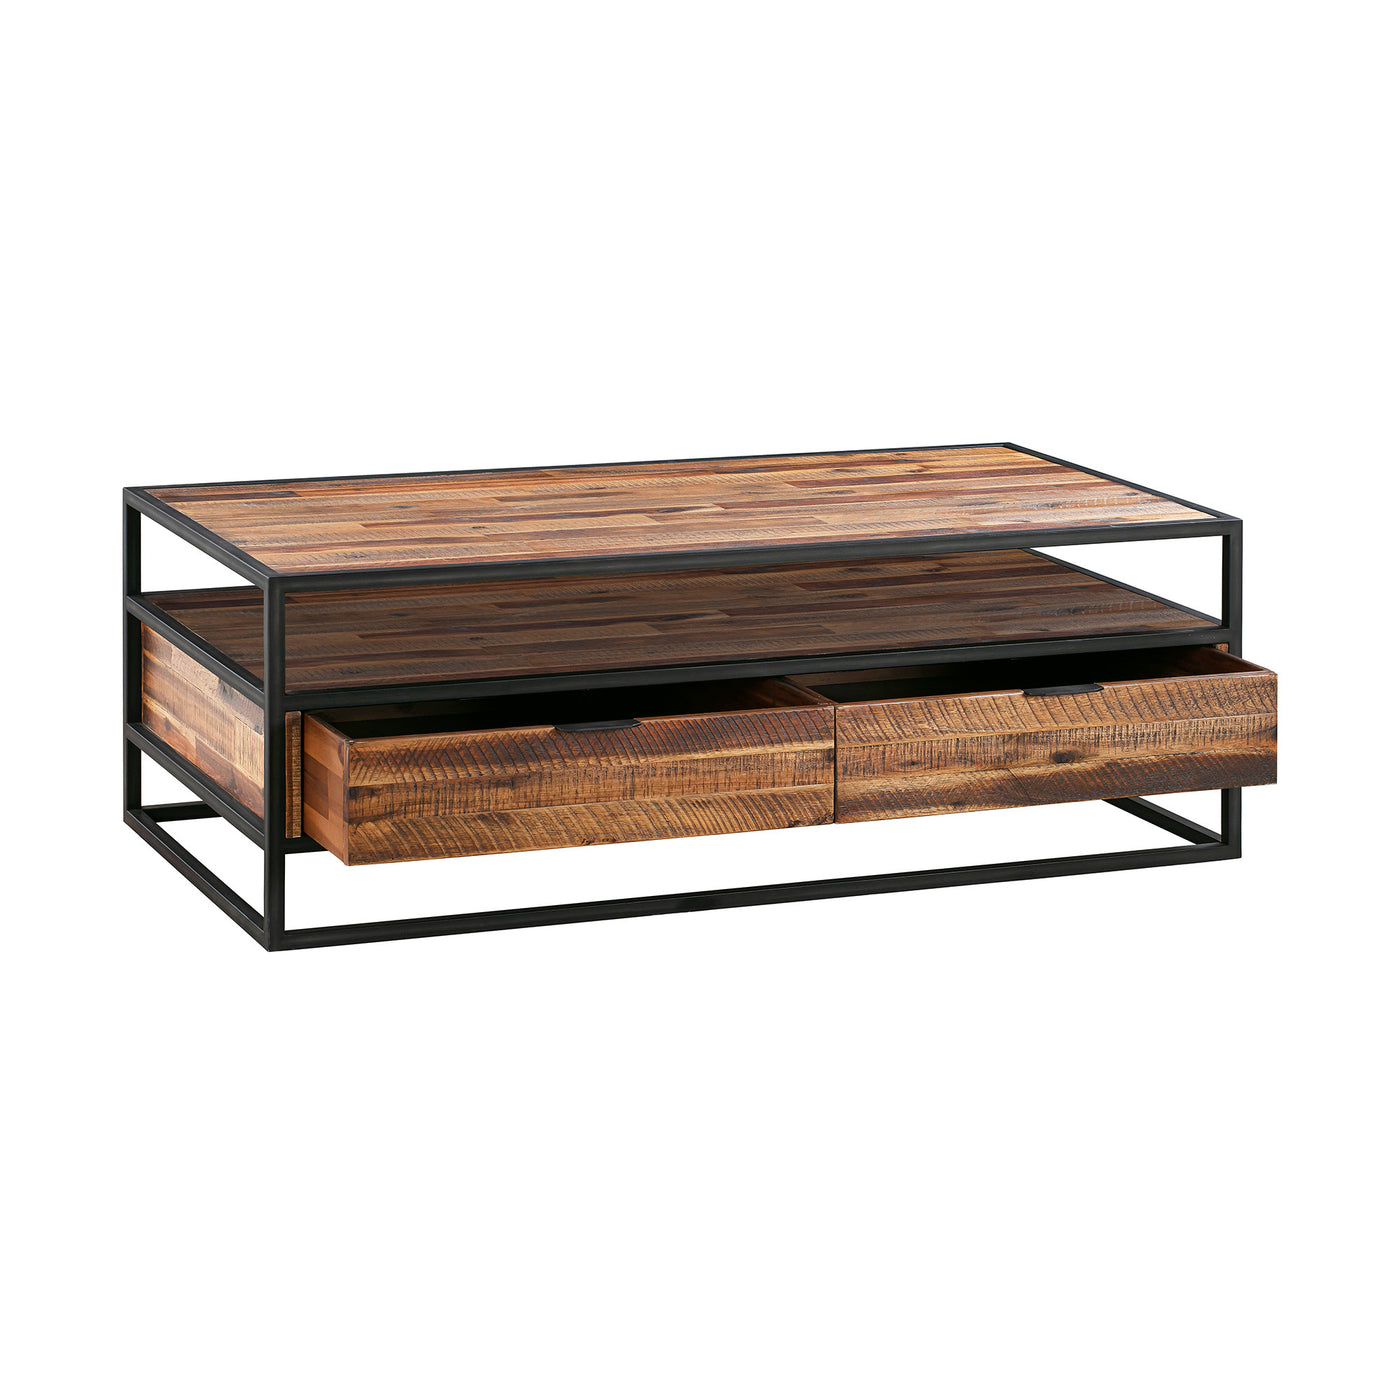 50" Brown And Black Solid Wood Rectangular Coffee Table With Shelf